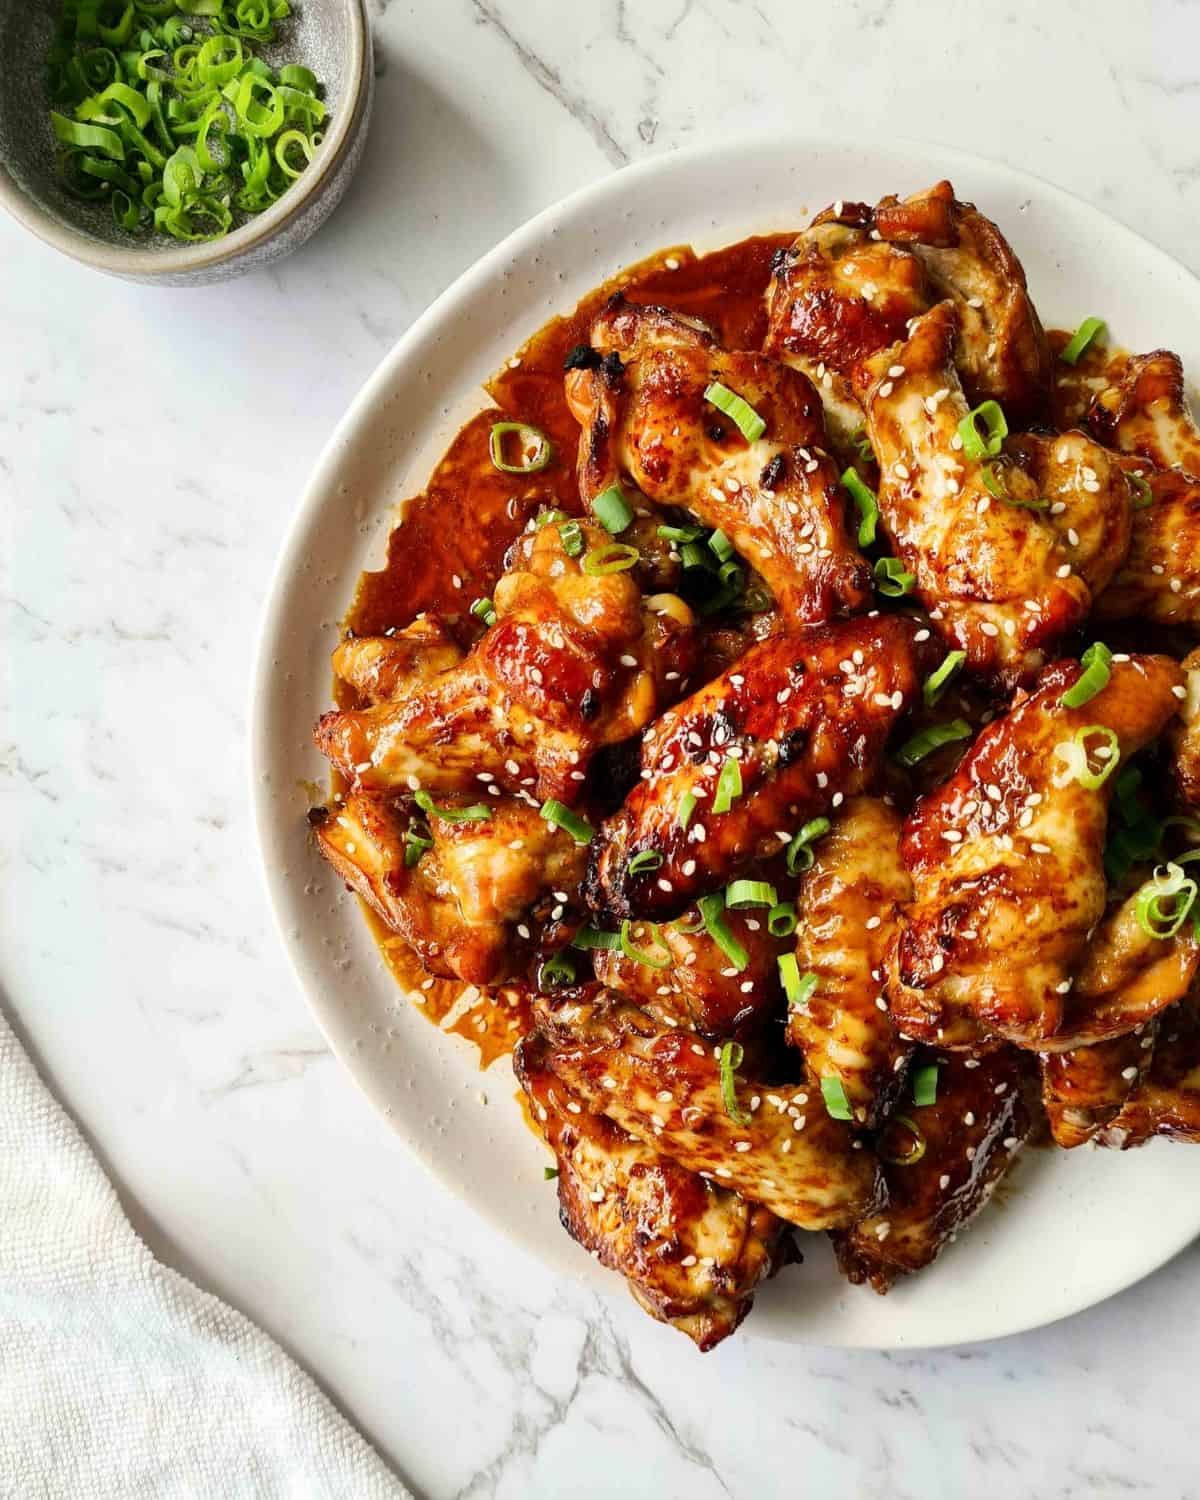 Sticky, saucy baked wings on a white plate